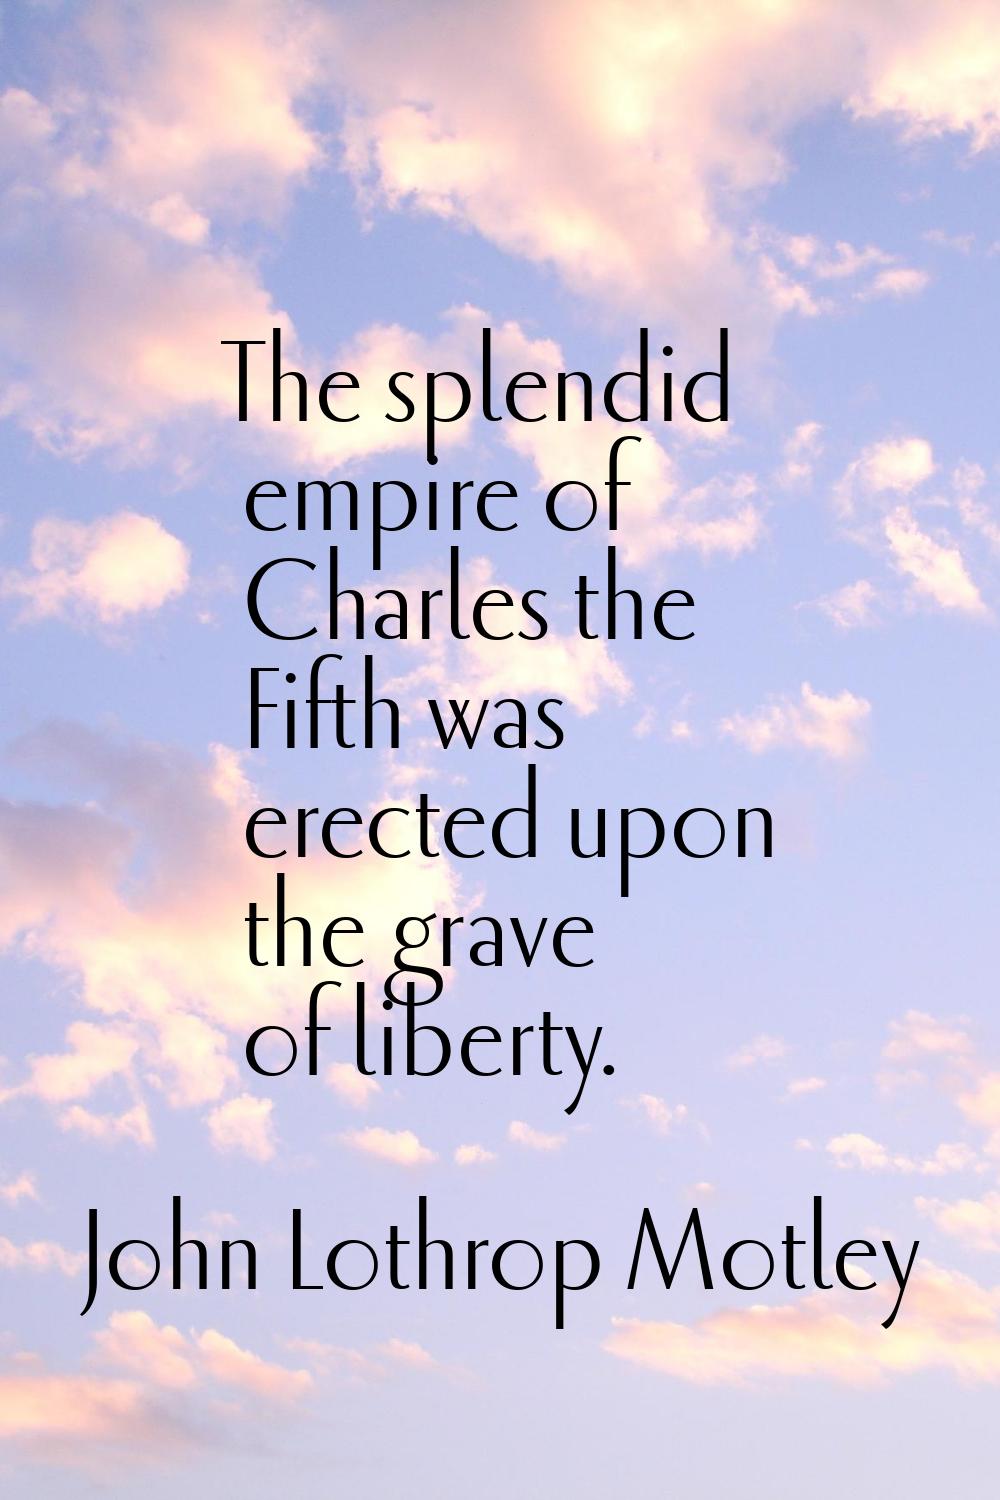 The splendid empire of Charles the Fifth was erected upon the grave of liberty.